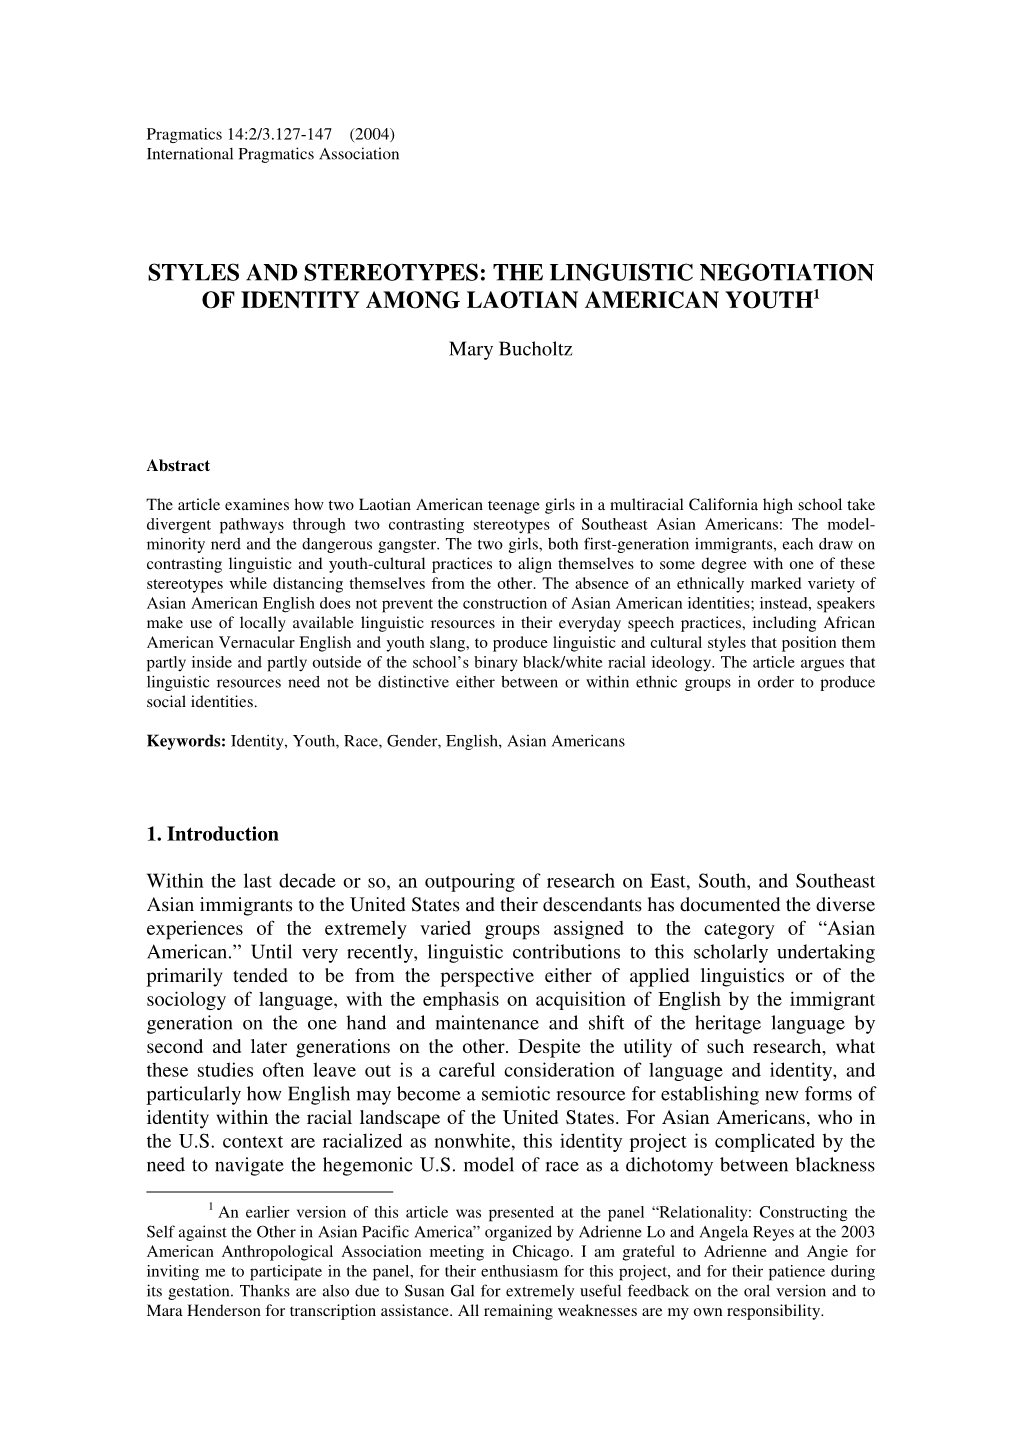 Styles and Stereotypes: the Linguistic Negotiation of Identity Among Laotian American Youth 1